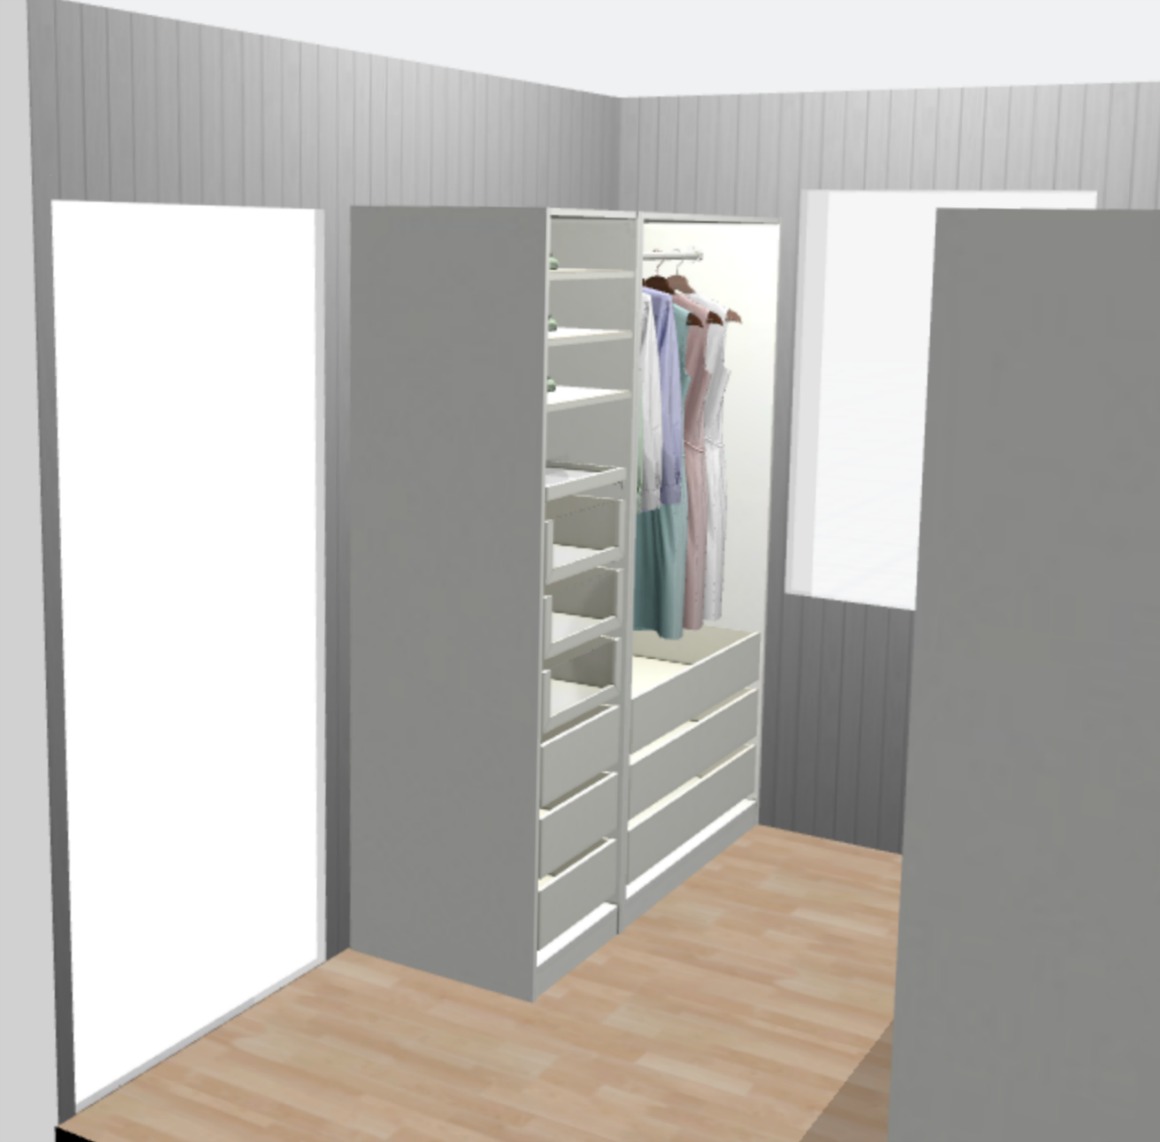 Our new Master Closet- IKEA PAX System